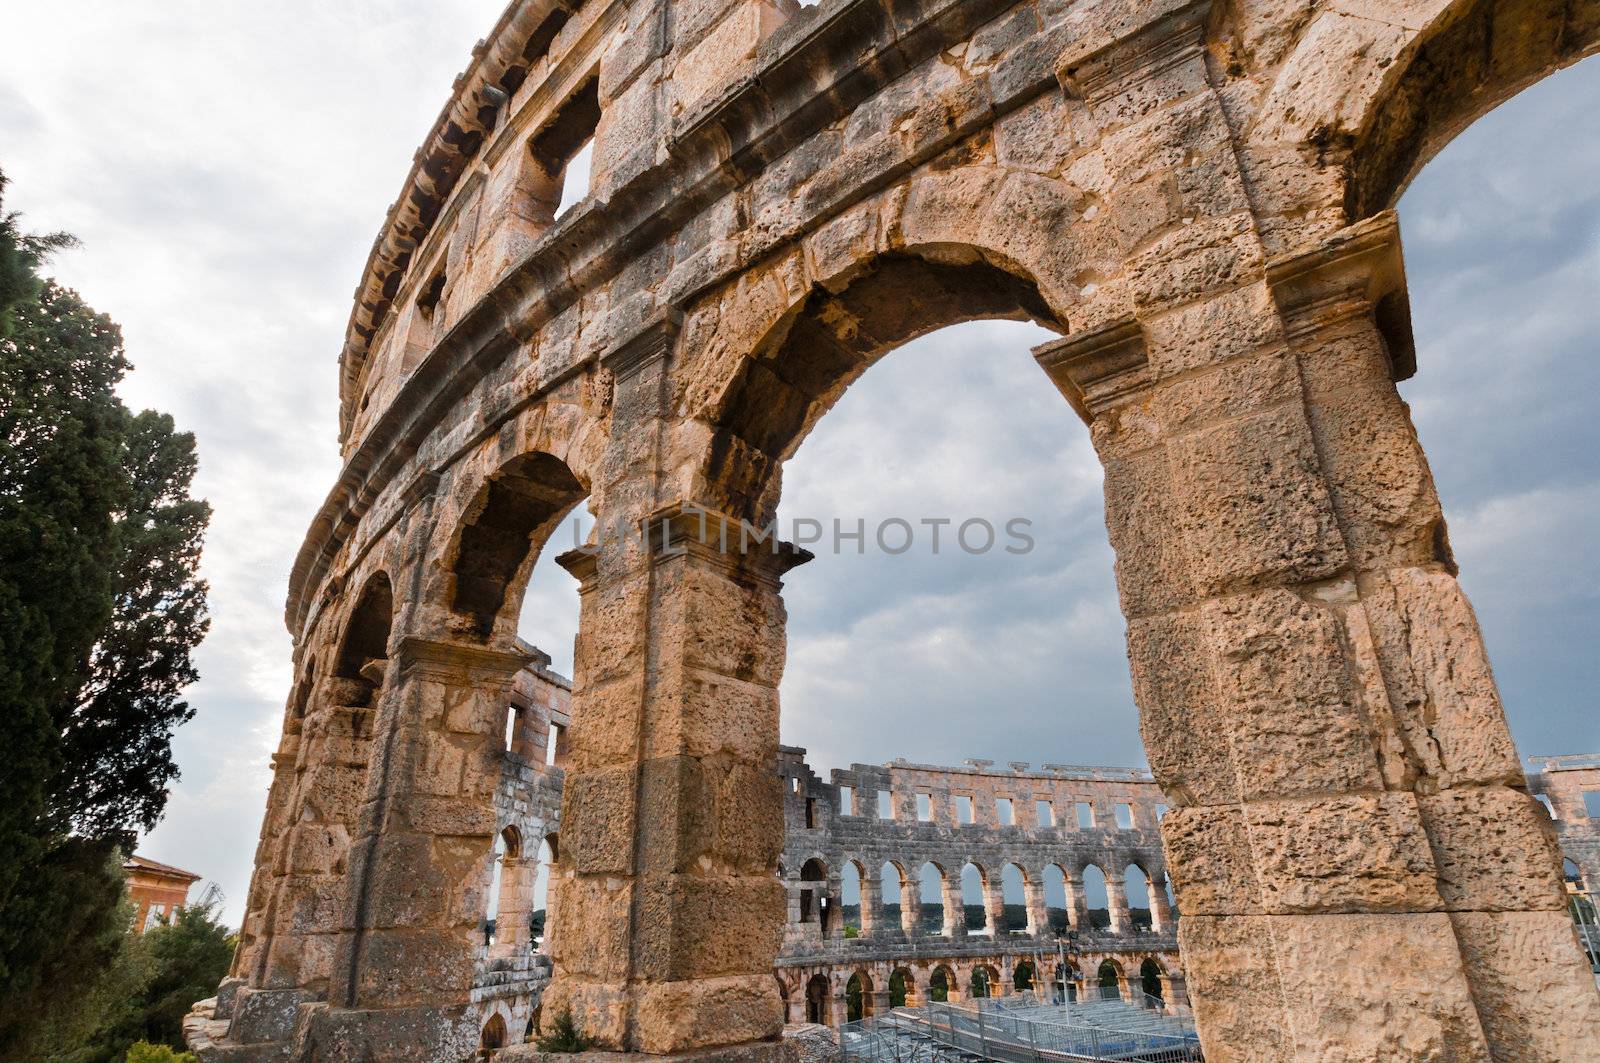 View of the Roman amphitheatre (Arena) in Pula. It was constructed in 27 BC - 68 AD and is among six largest surviving Roman arenas in the World. Pula Arena is best preserved ancient monument in Croatia.